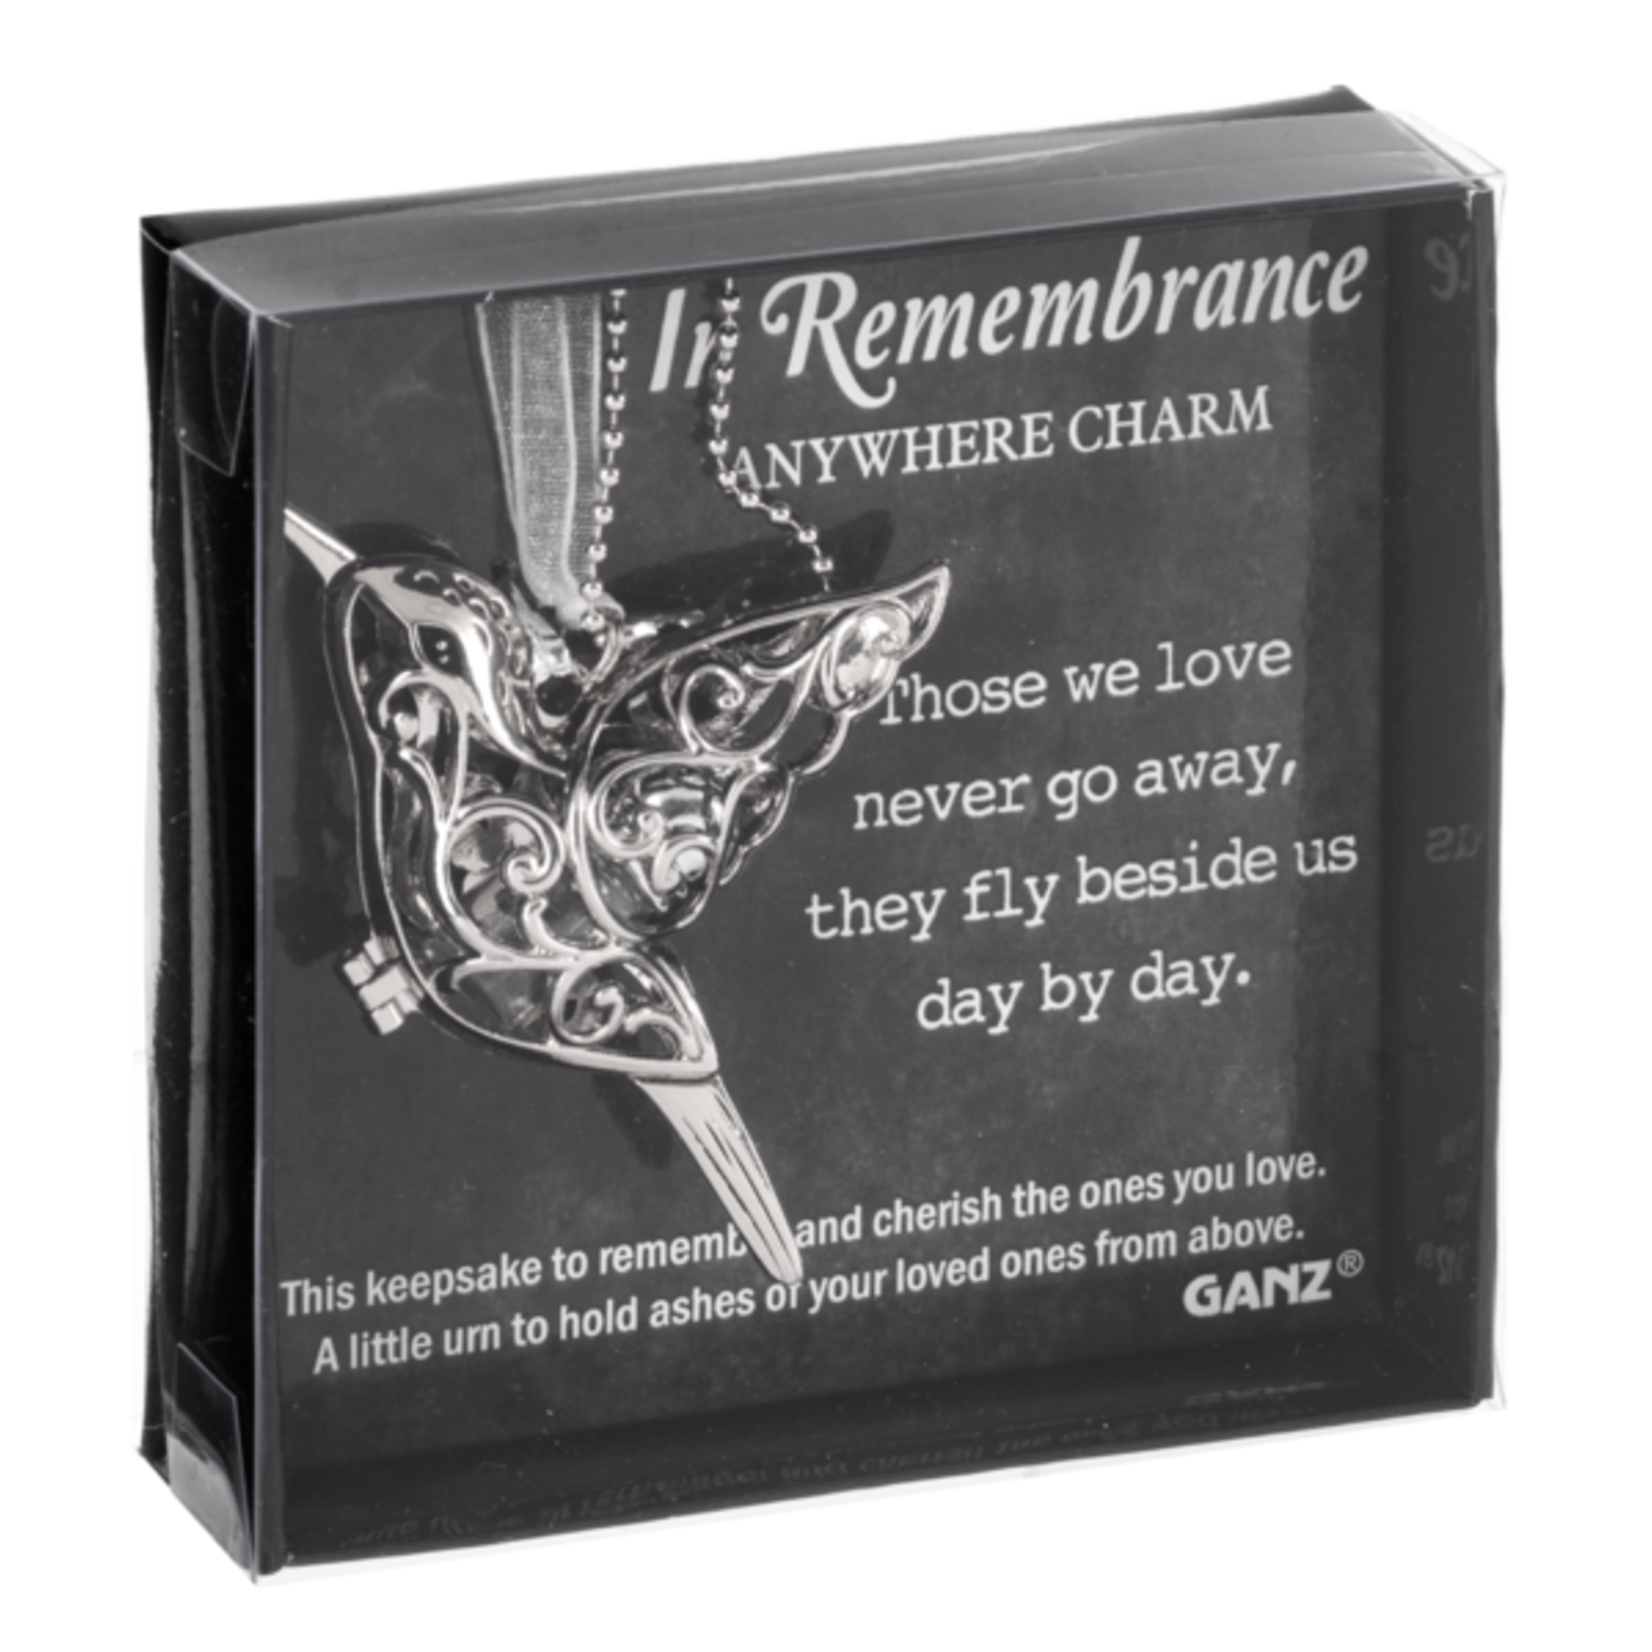 Ganz Hummingbird in Remembrance Anywhere Charm